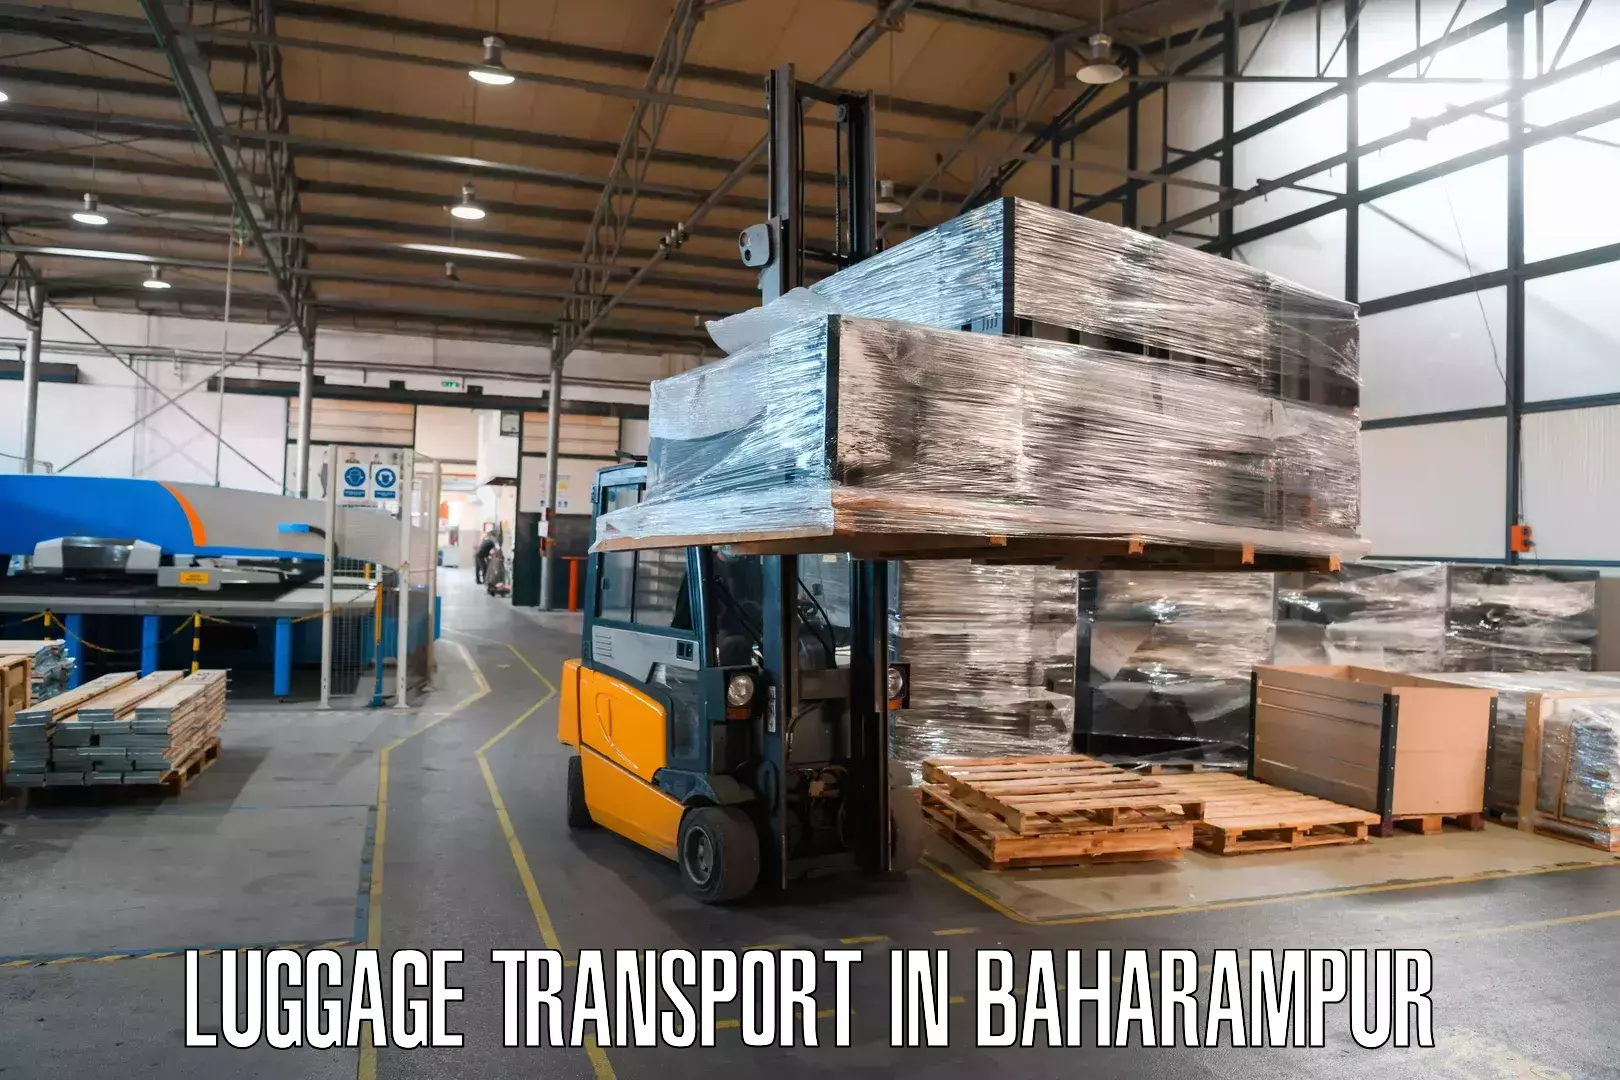 Weekend baggage shipping in Baharampur